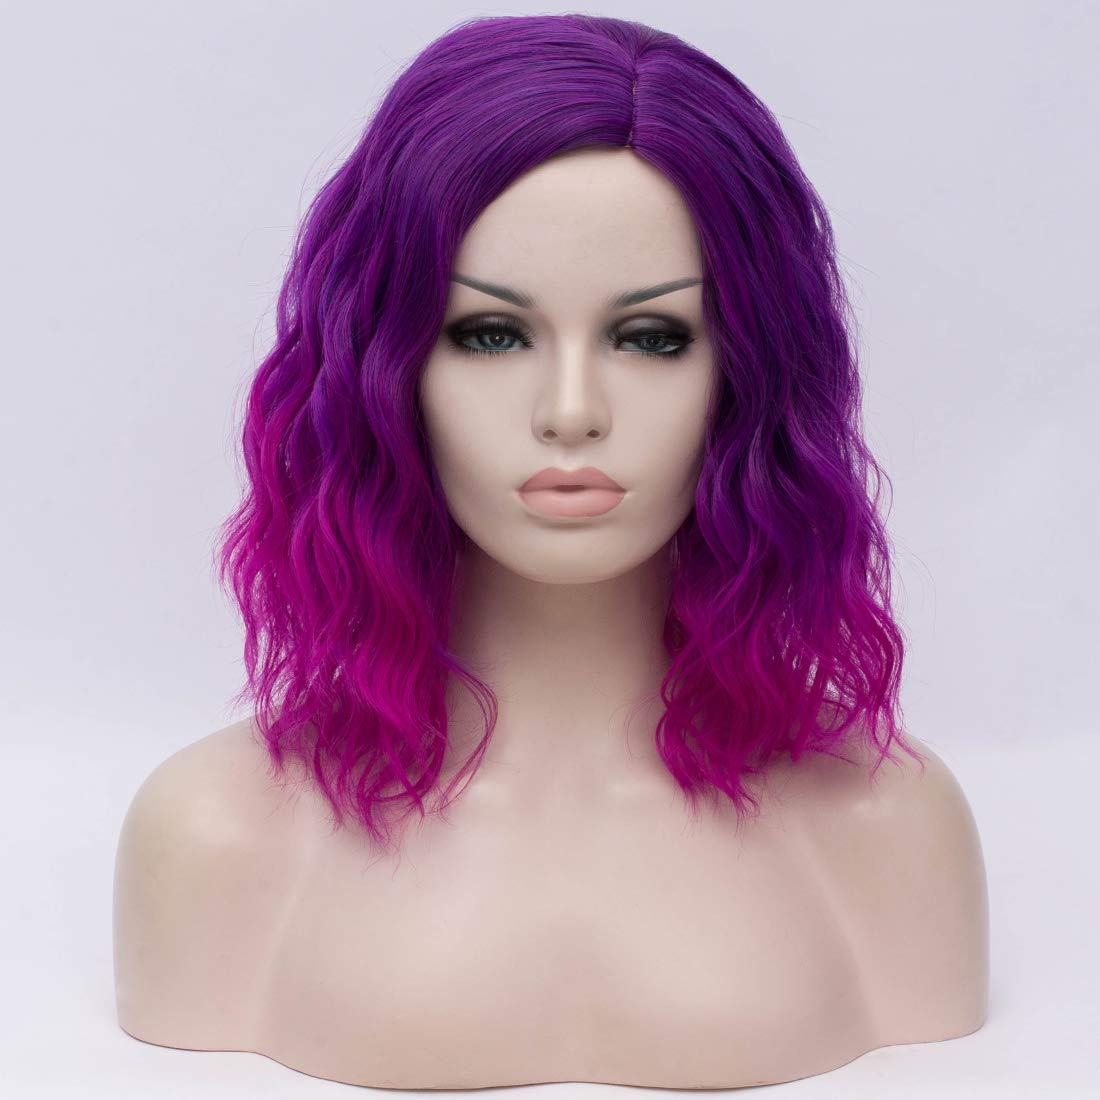 purple wig HAIR Synthetic Curly Bob Wig with Bangs Short Bob Wavy Hair Wigs Wine Red Color Wigs for Women Bob Style Synthetic Heat Resistant Bob Wigs.